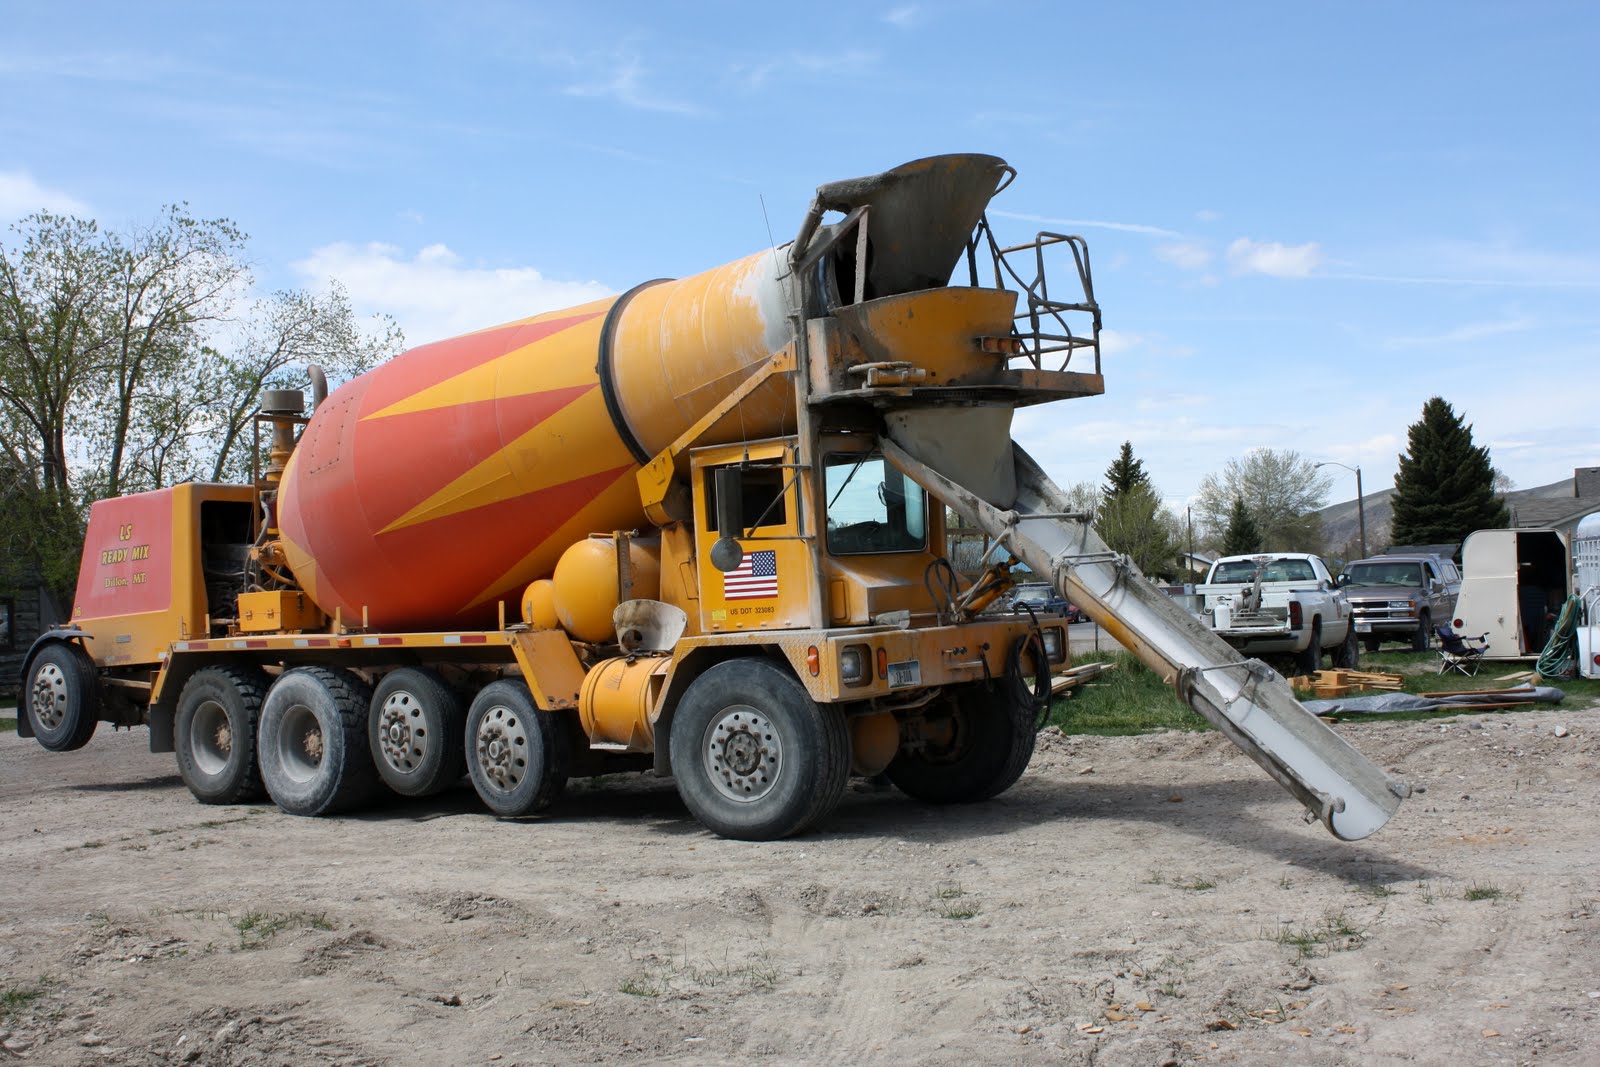 A Homemaker's Journal: cement trucks rate up there with trains